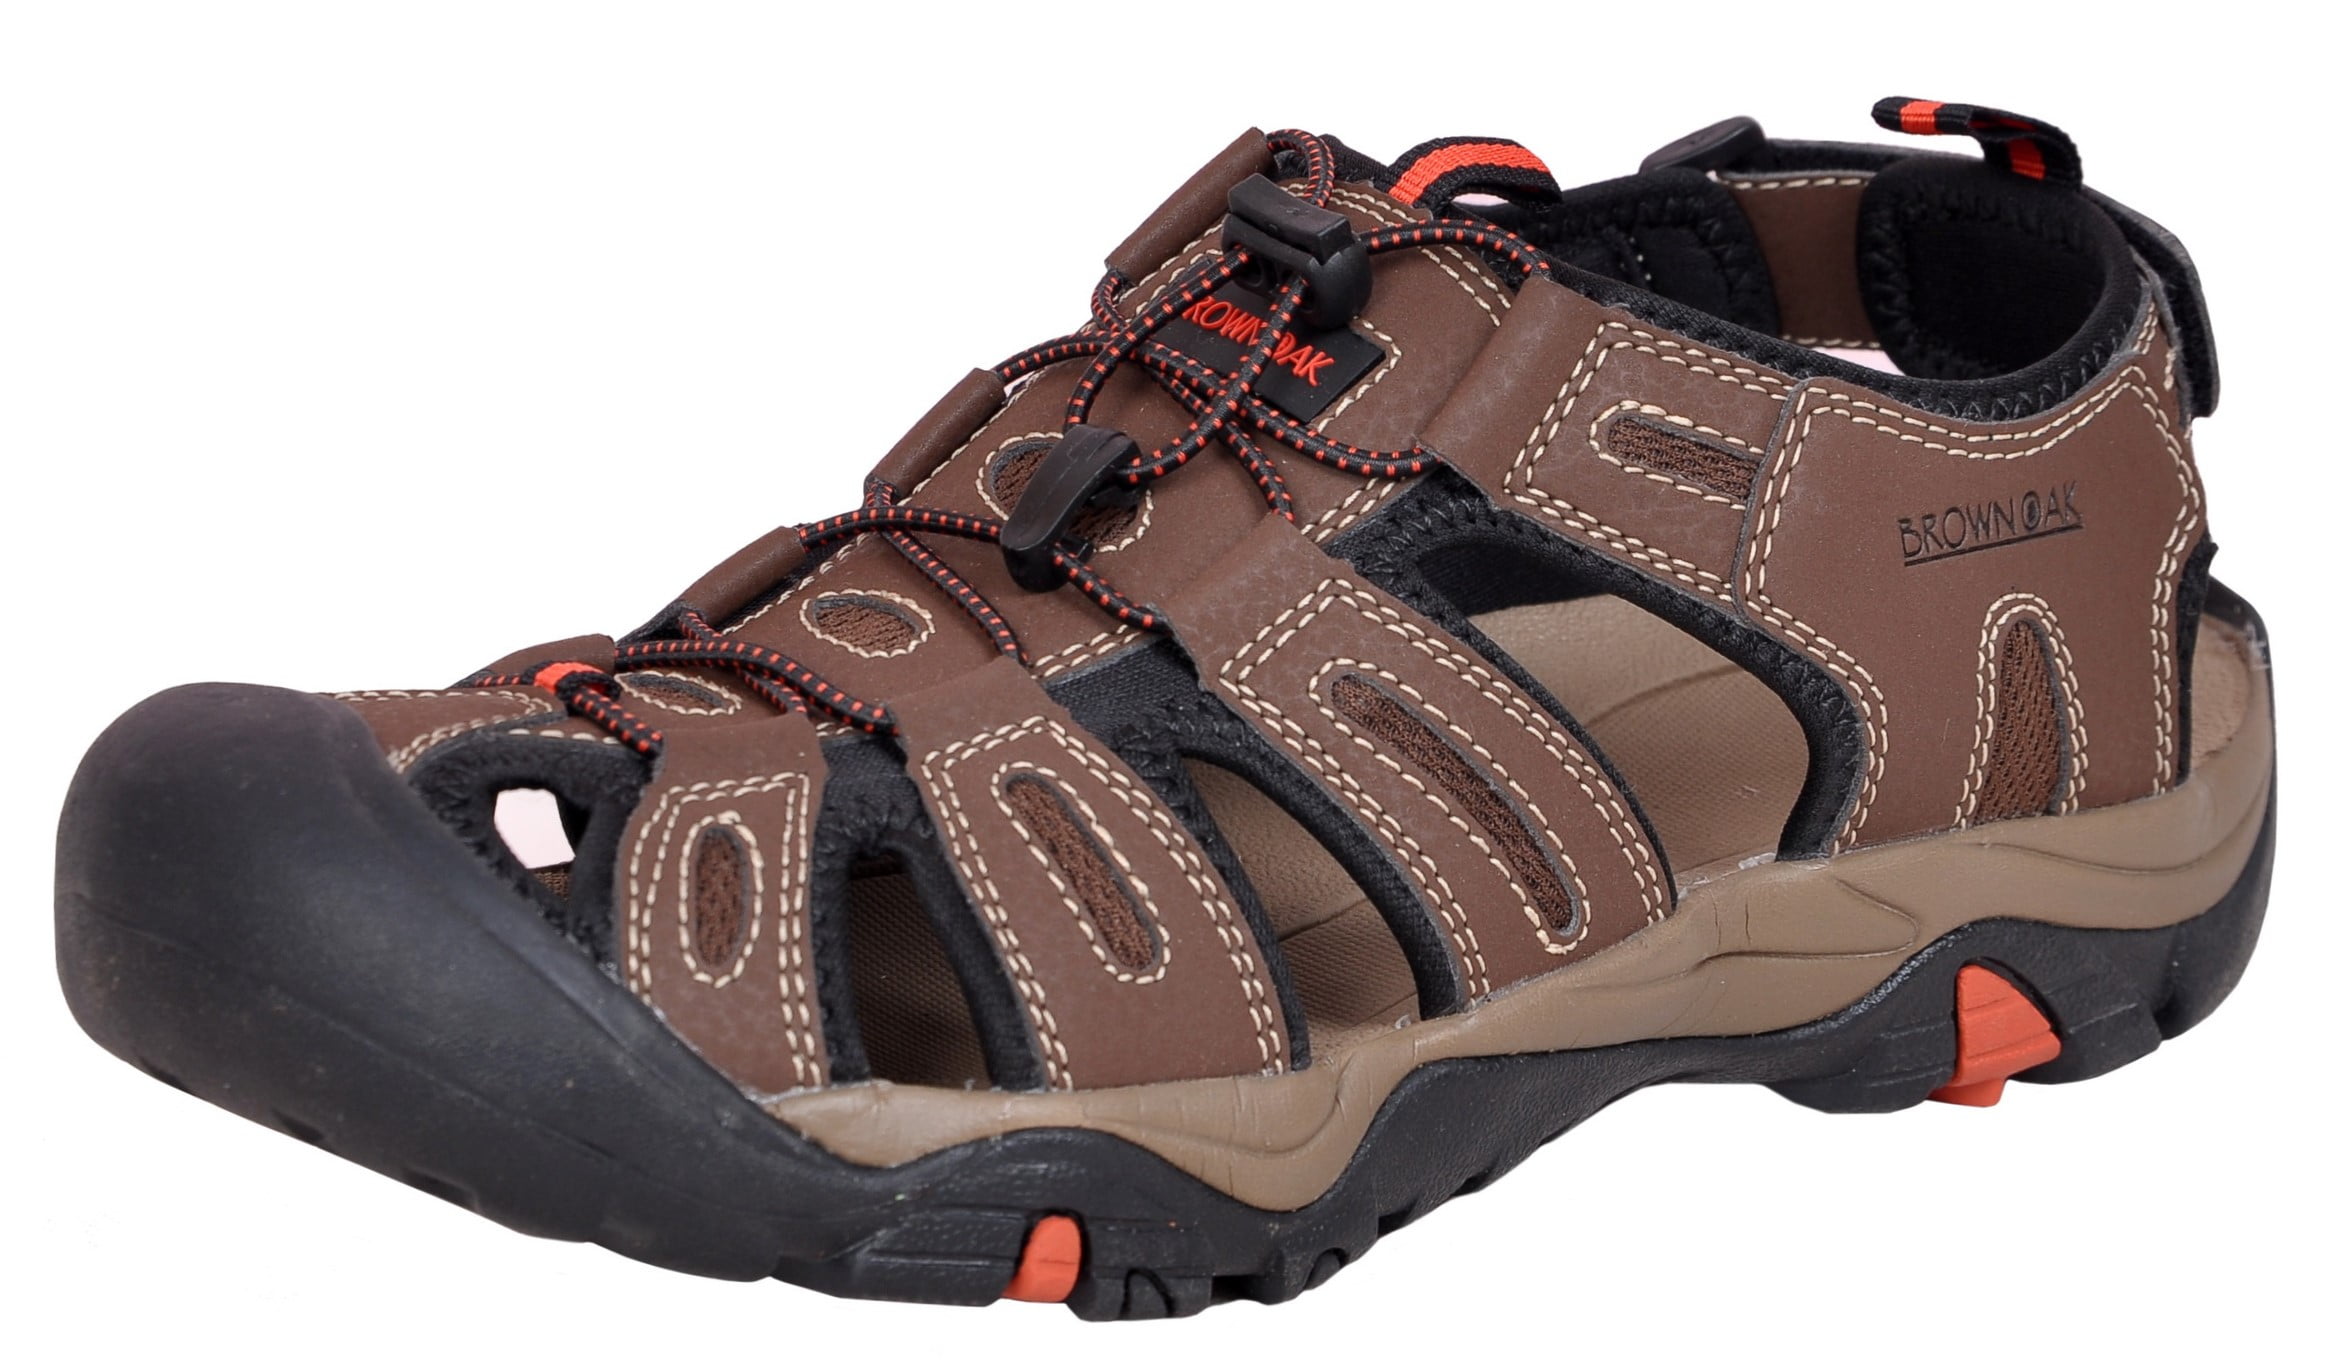 Men Genuine Leather Casual Hiking Shoes Closed Toe Sport Sandals Outdoor US 6-12 